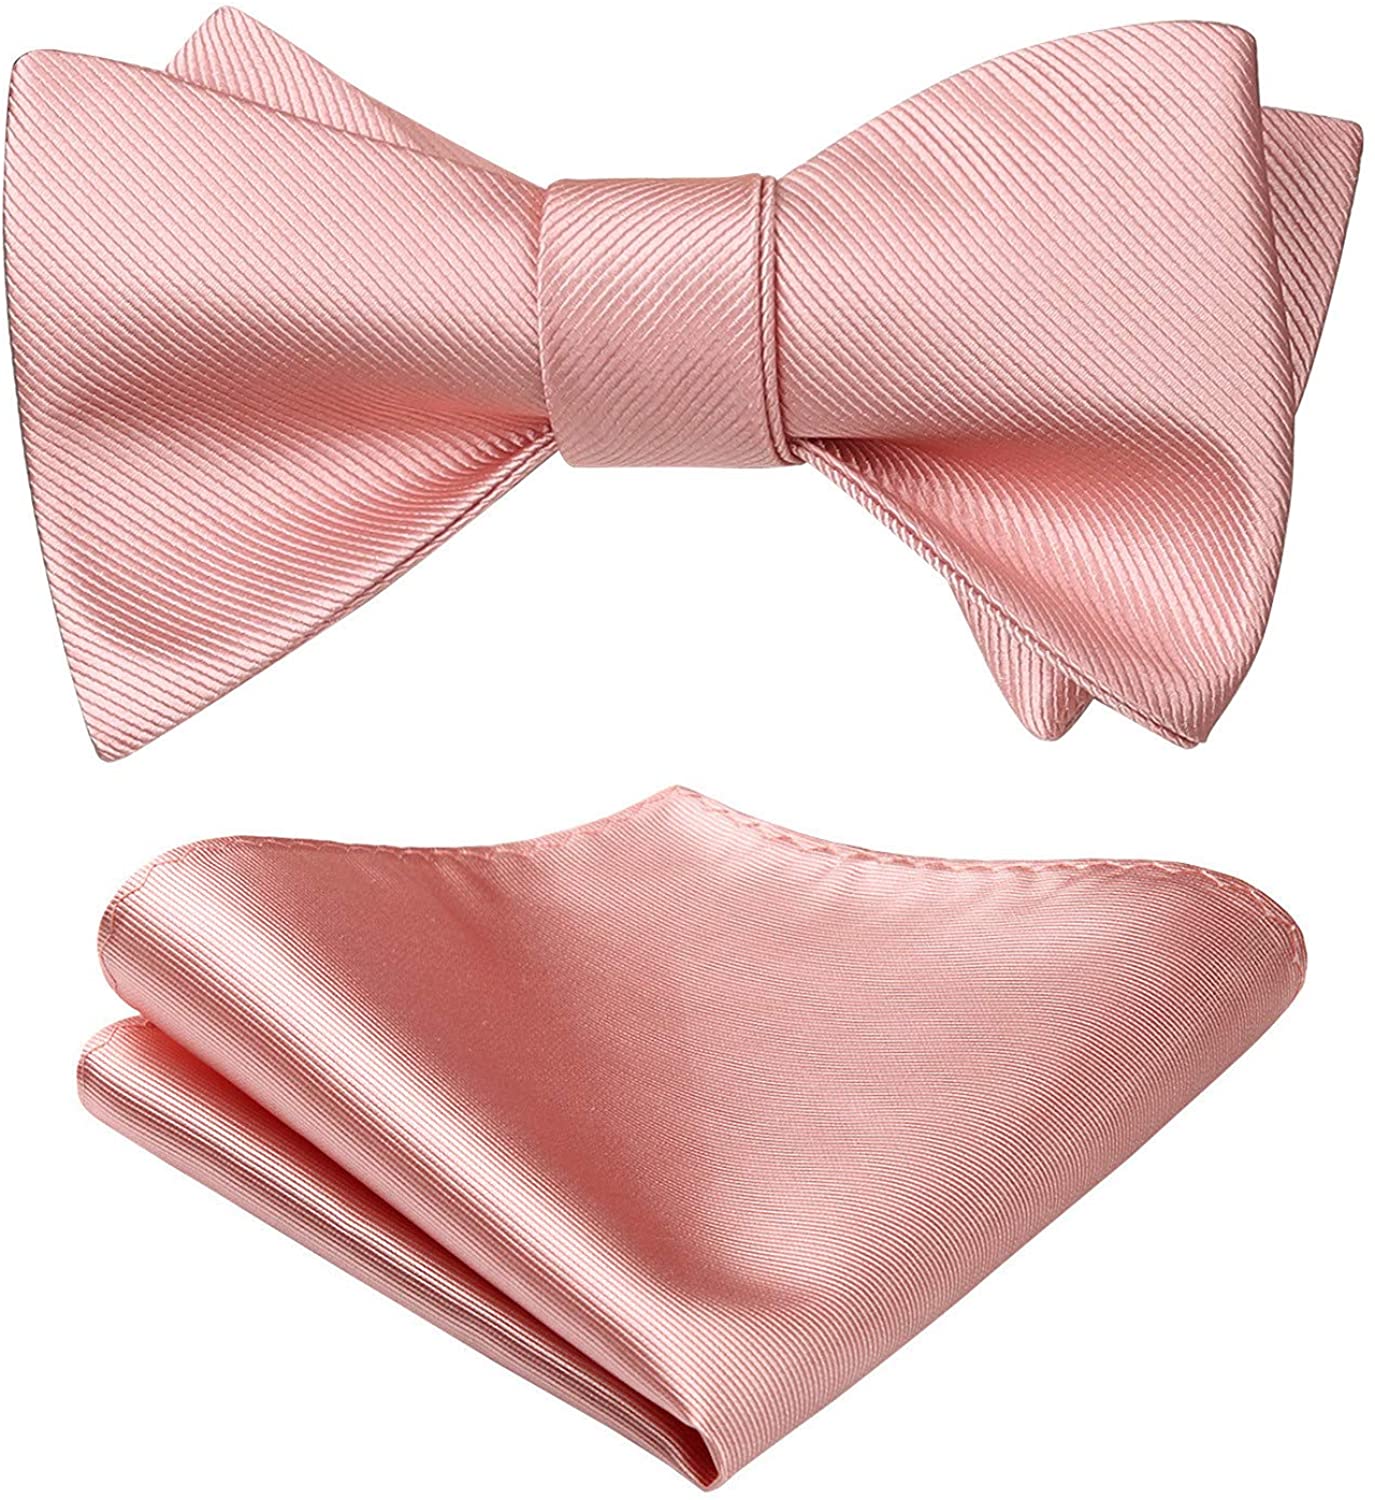 Solid Untied Bow Ties for Men Classic Satin Self Tie Bowtie Hanky Set by HISDERN